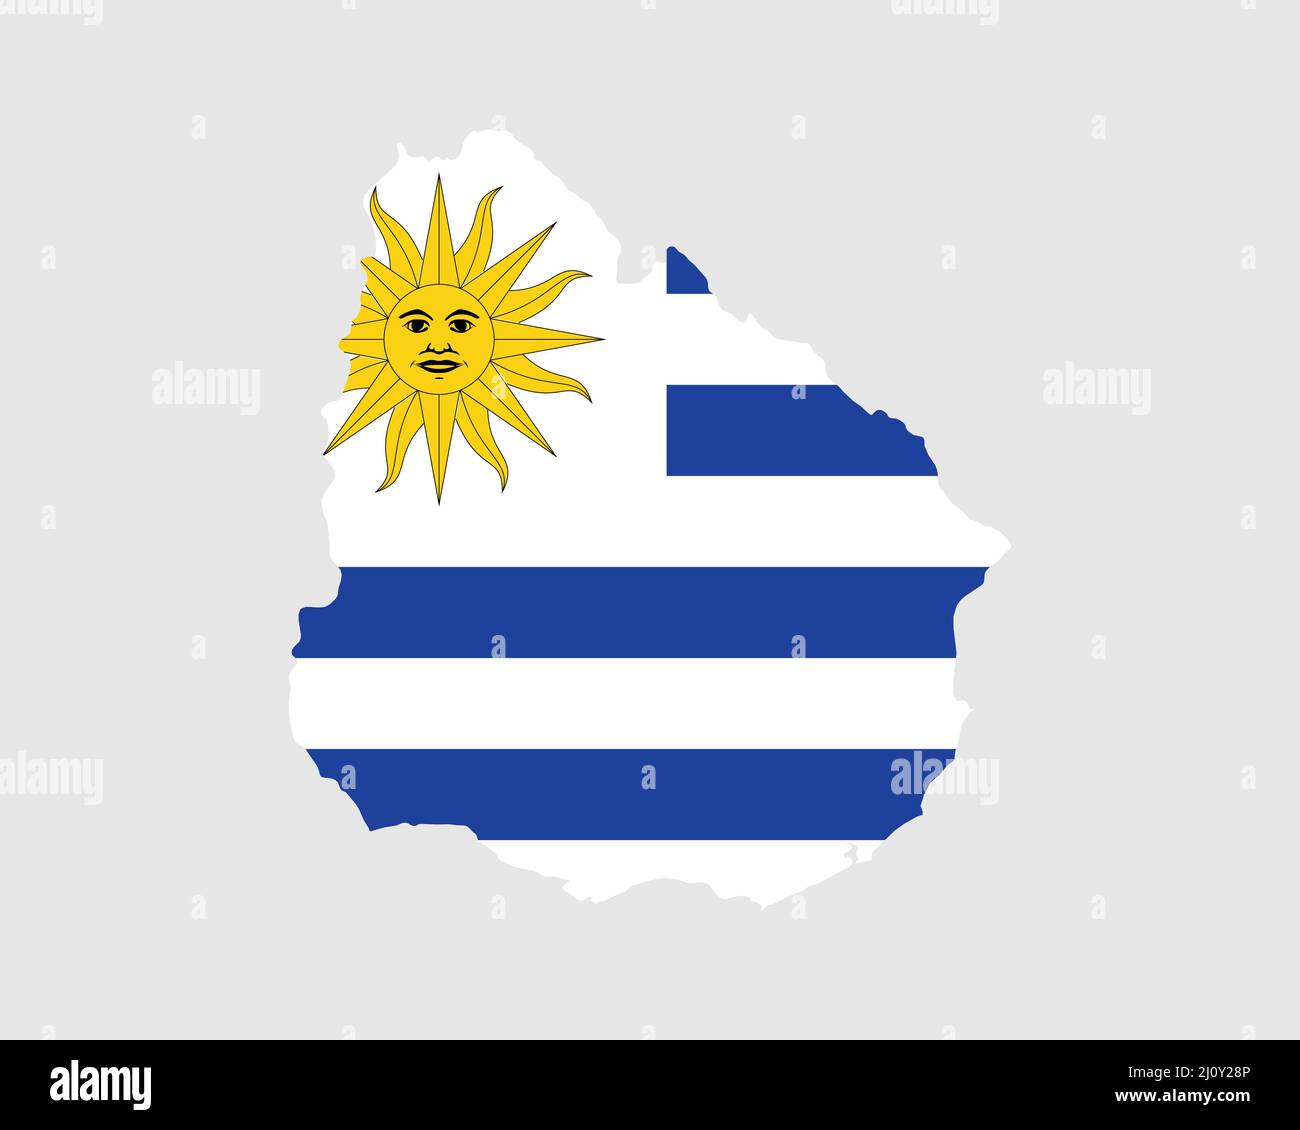 Uruguay Flag Map. Map of the Oriental Republic of Uruguay with the Uruguayan country banner. Vector Illustration. Stock Vector